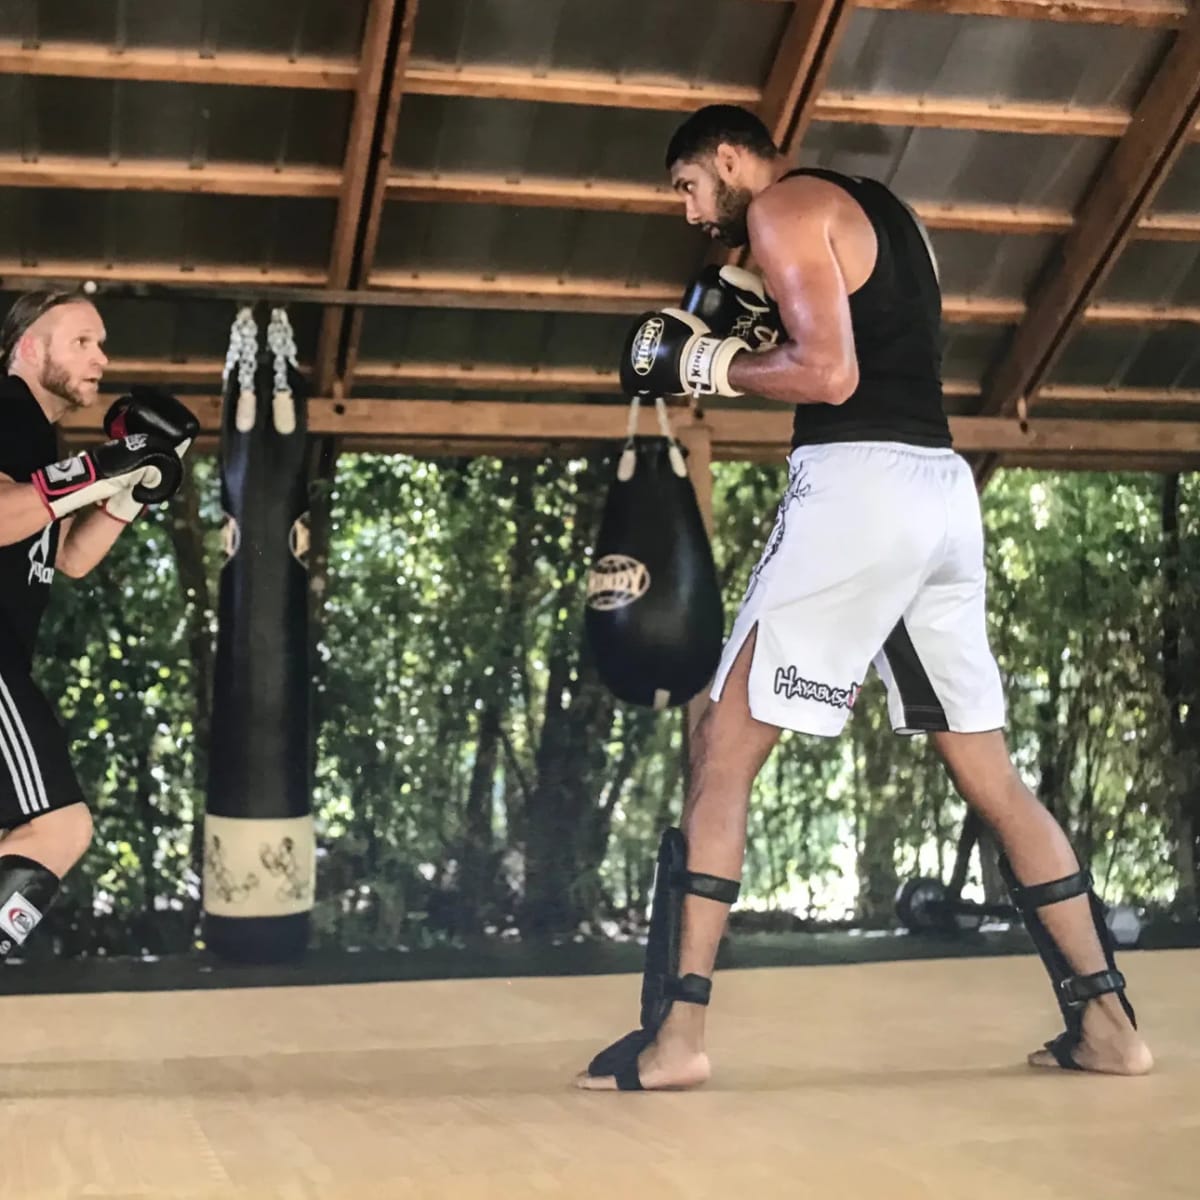 a F***ing Monster': San Antonio Legend Tim Duncan with Kickboxing vs. Basketball - Sports Inside The Spurs, Analysis and More